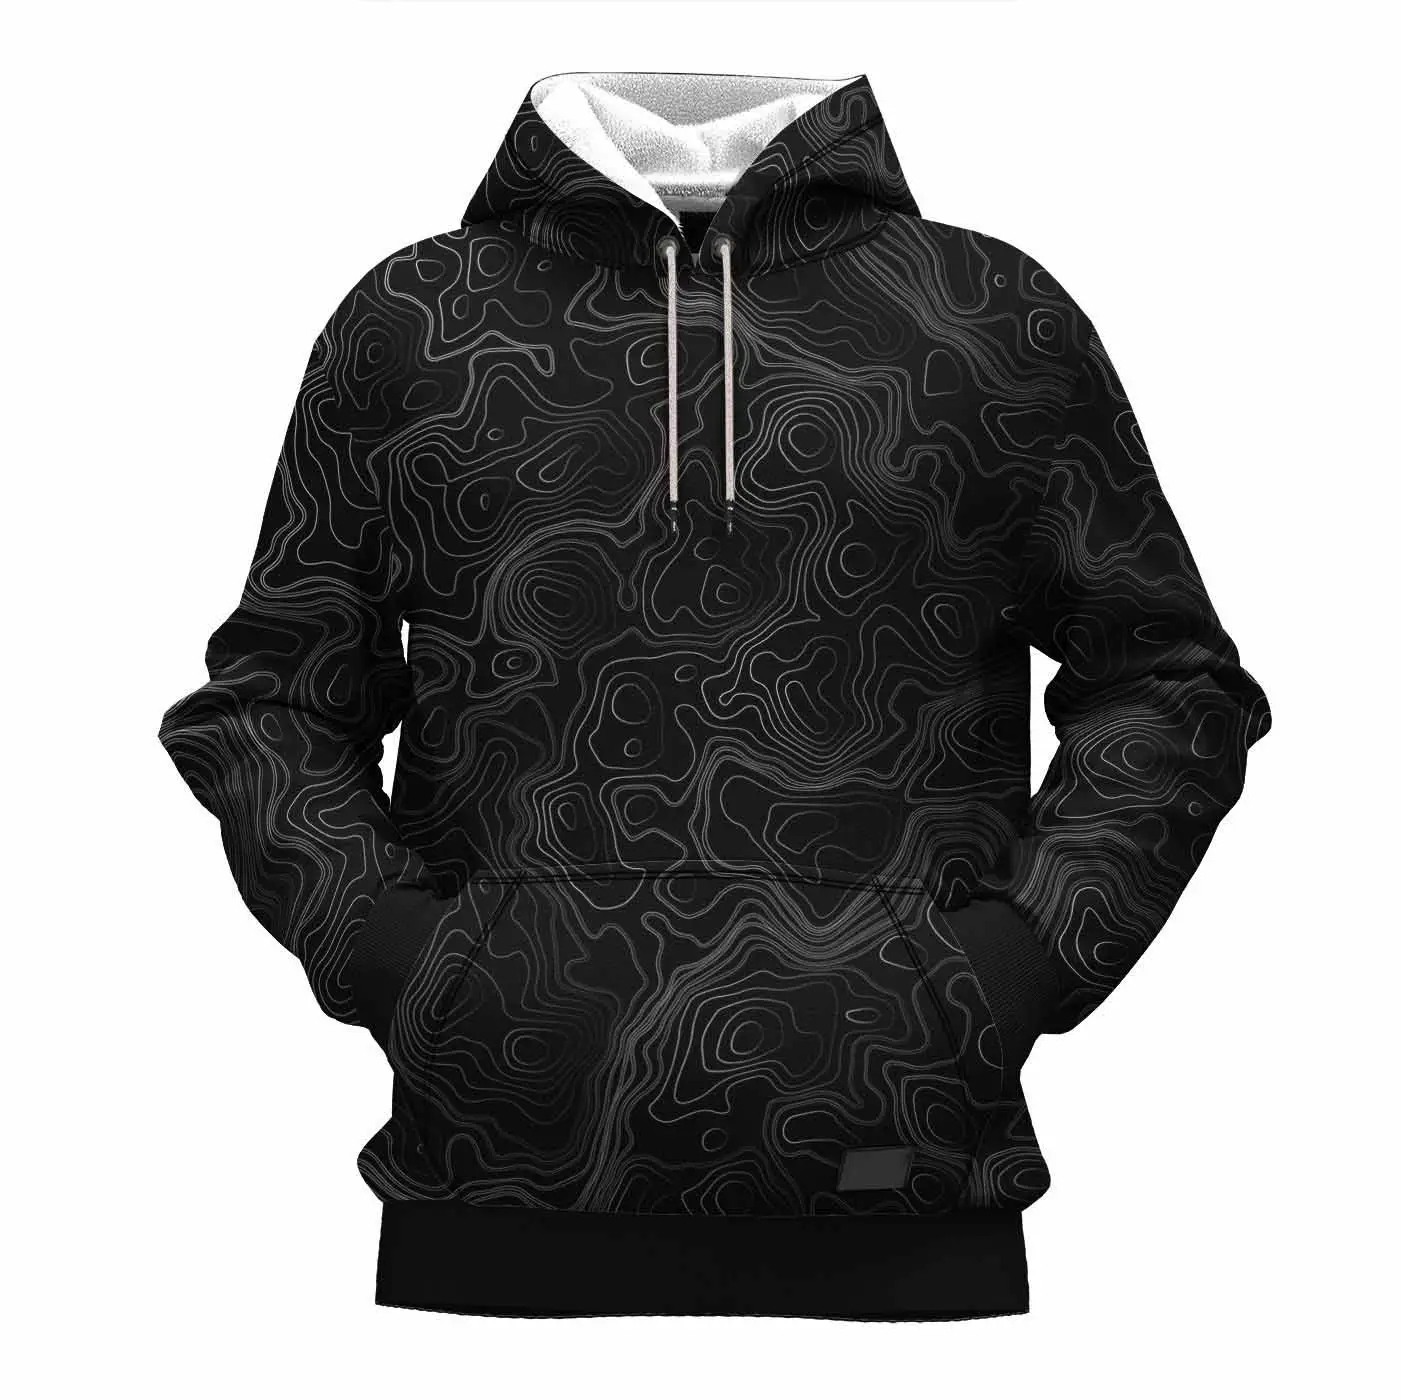 Best High Quality And Cheap Price Men Sublimation Hoodies Fully Sublimated Customized Hoodies Made in Pakistan